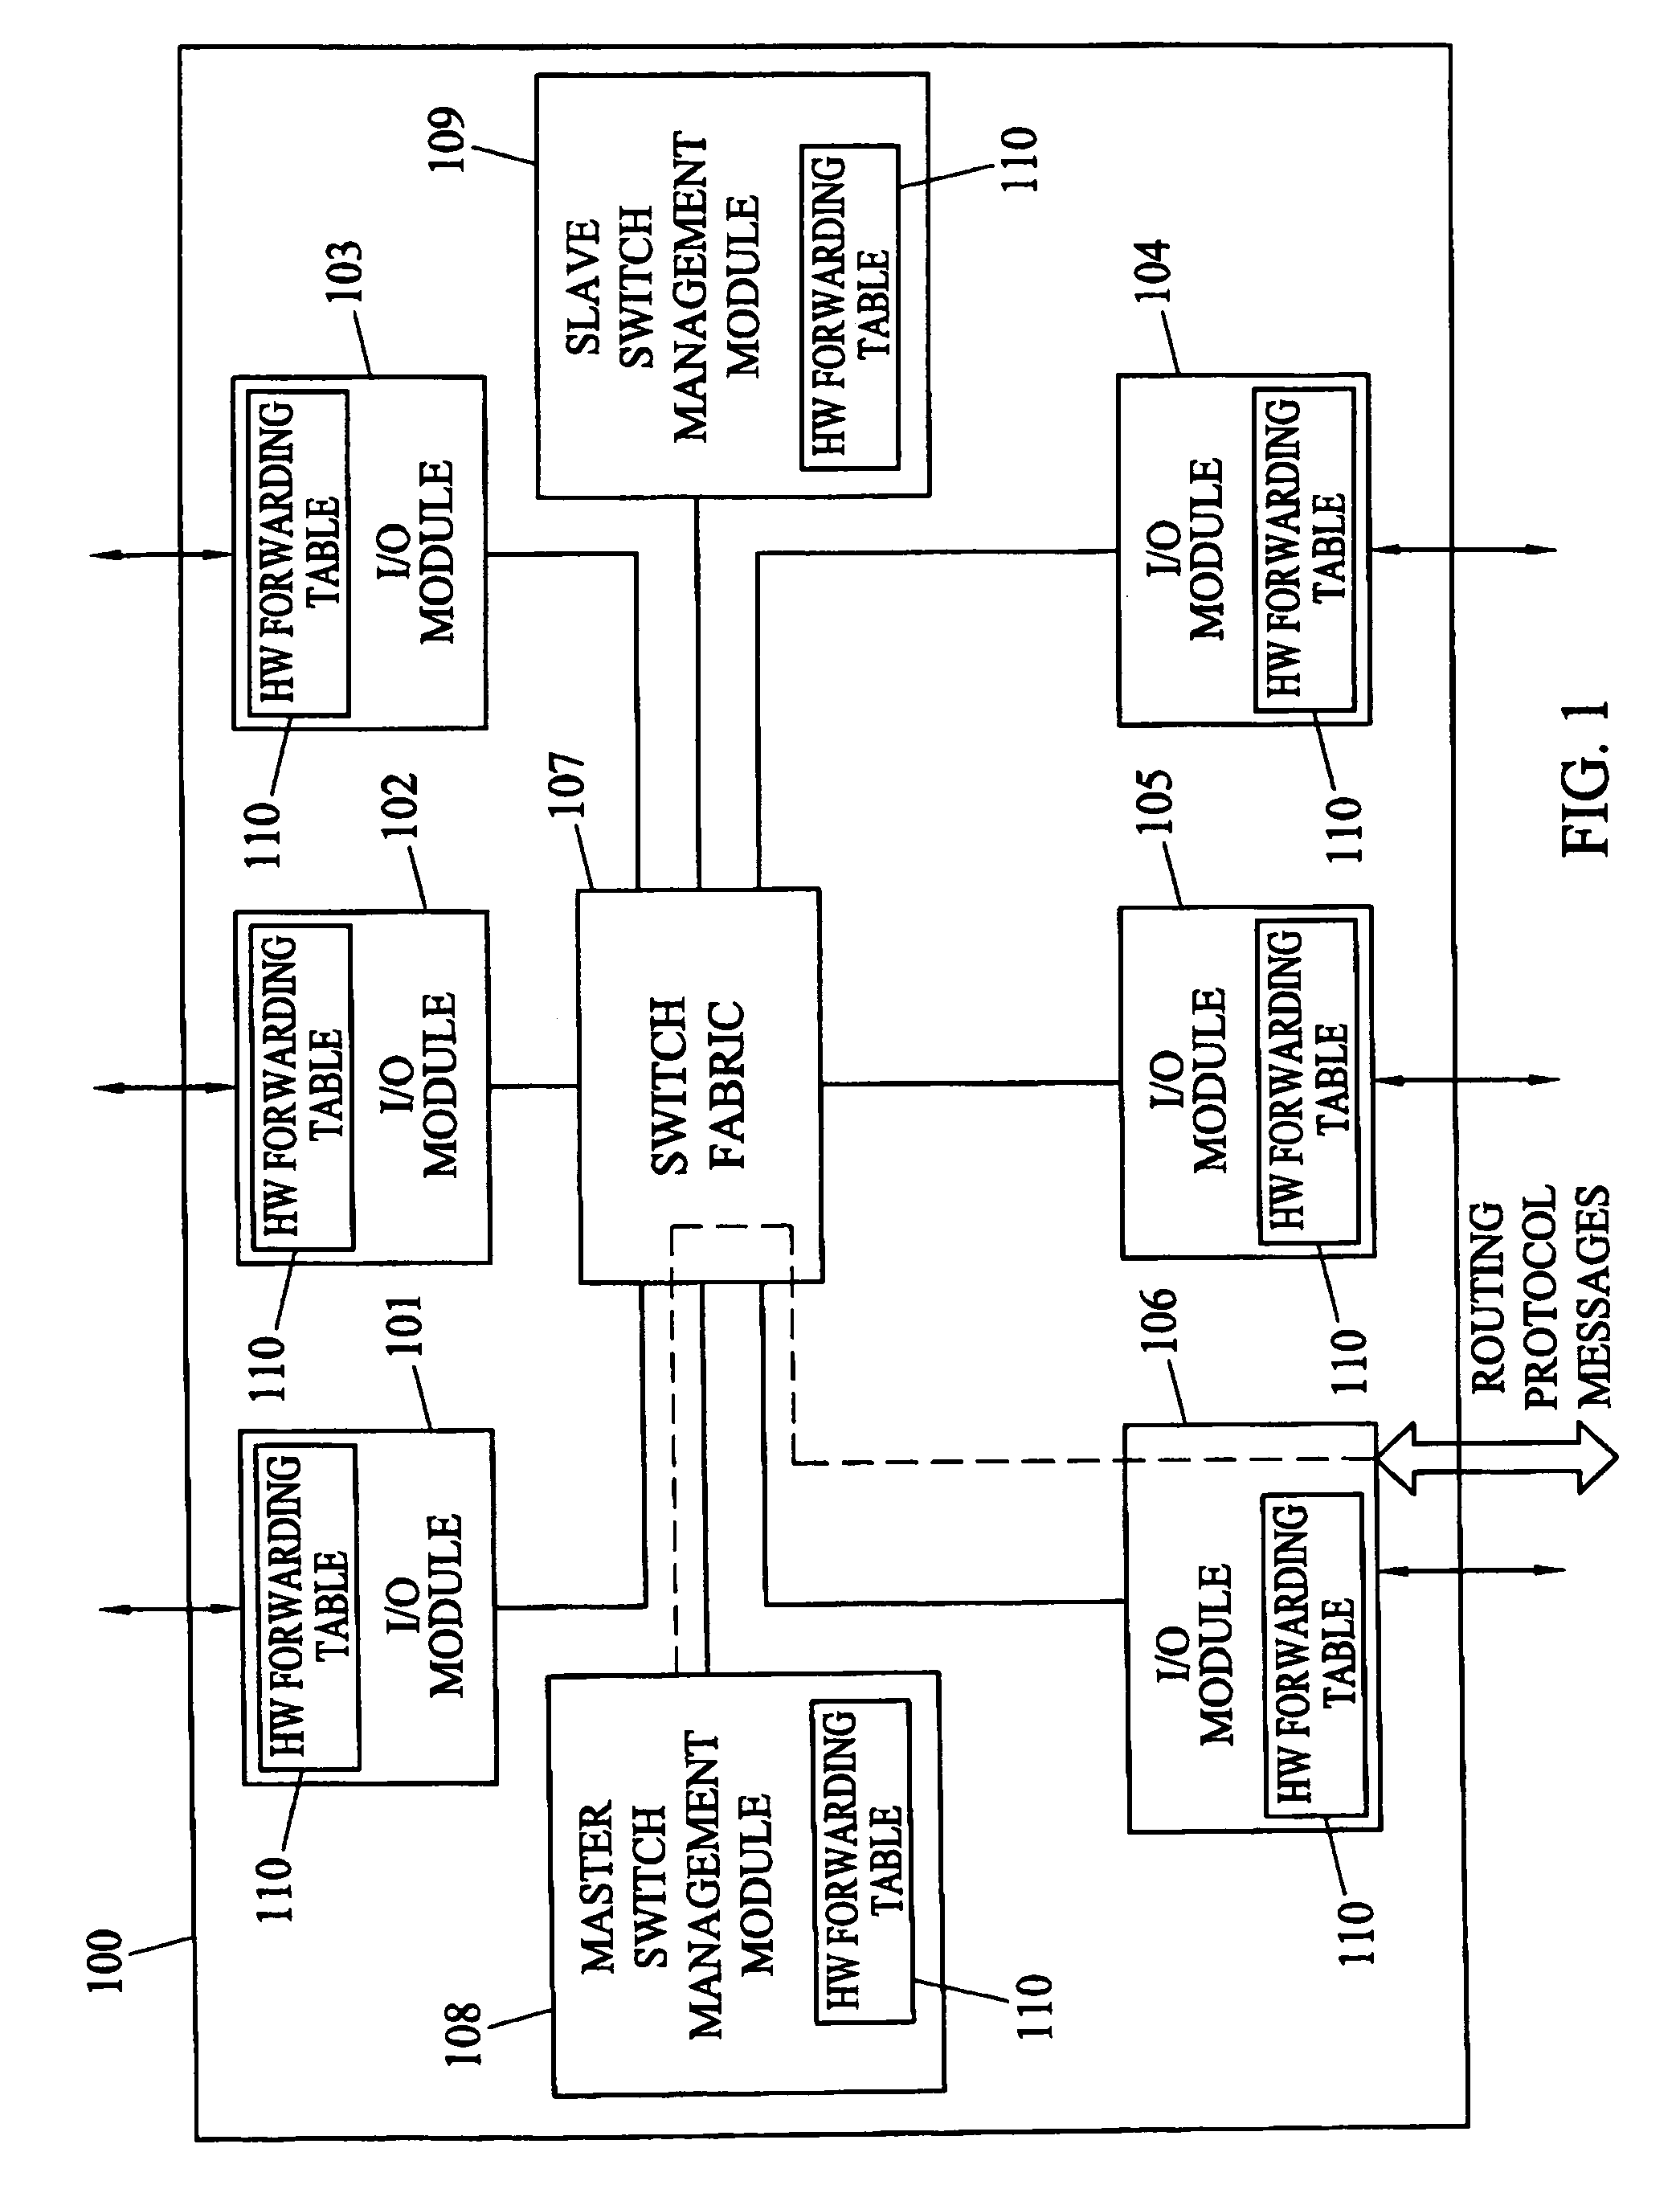 Methods and systems for hitless switch management module failover and upgrade